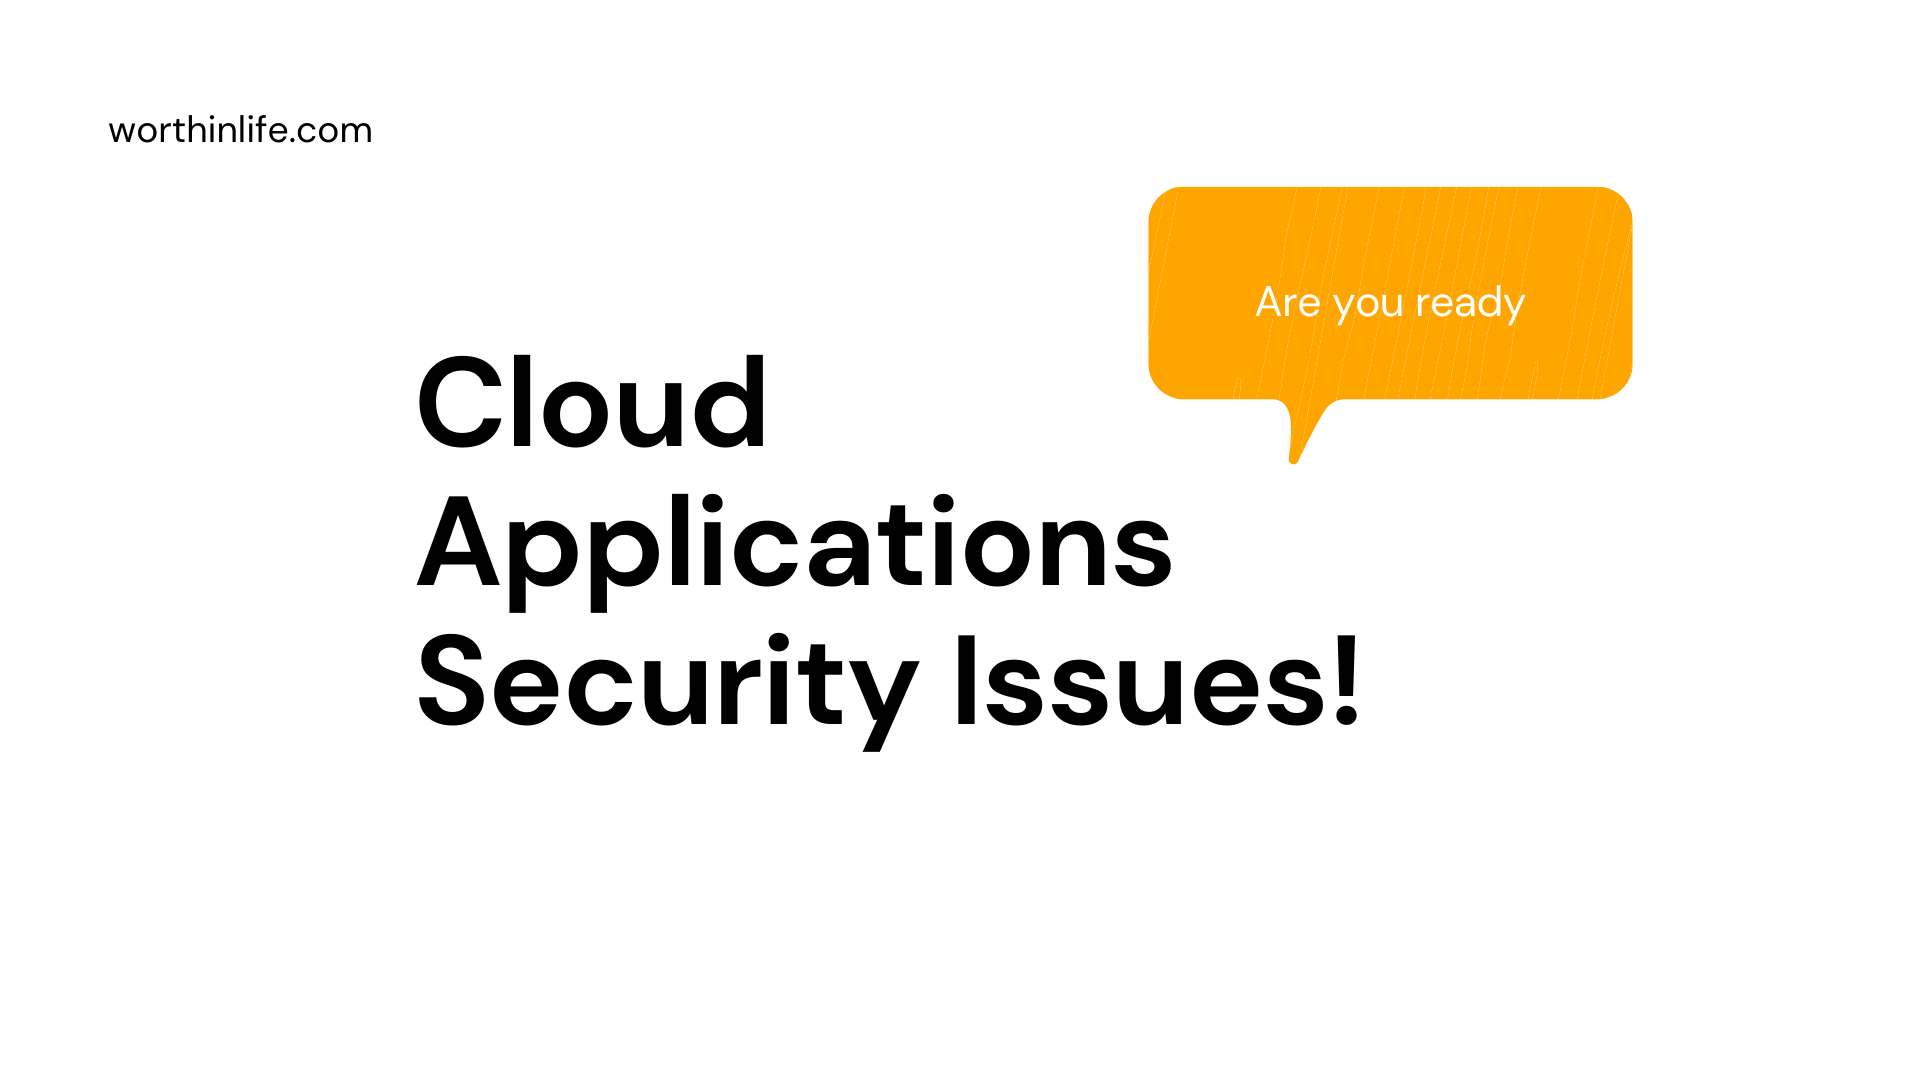 What are cloud application security issues?